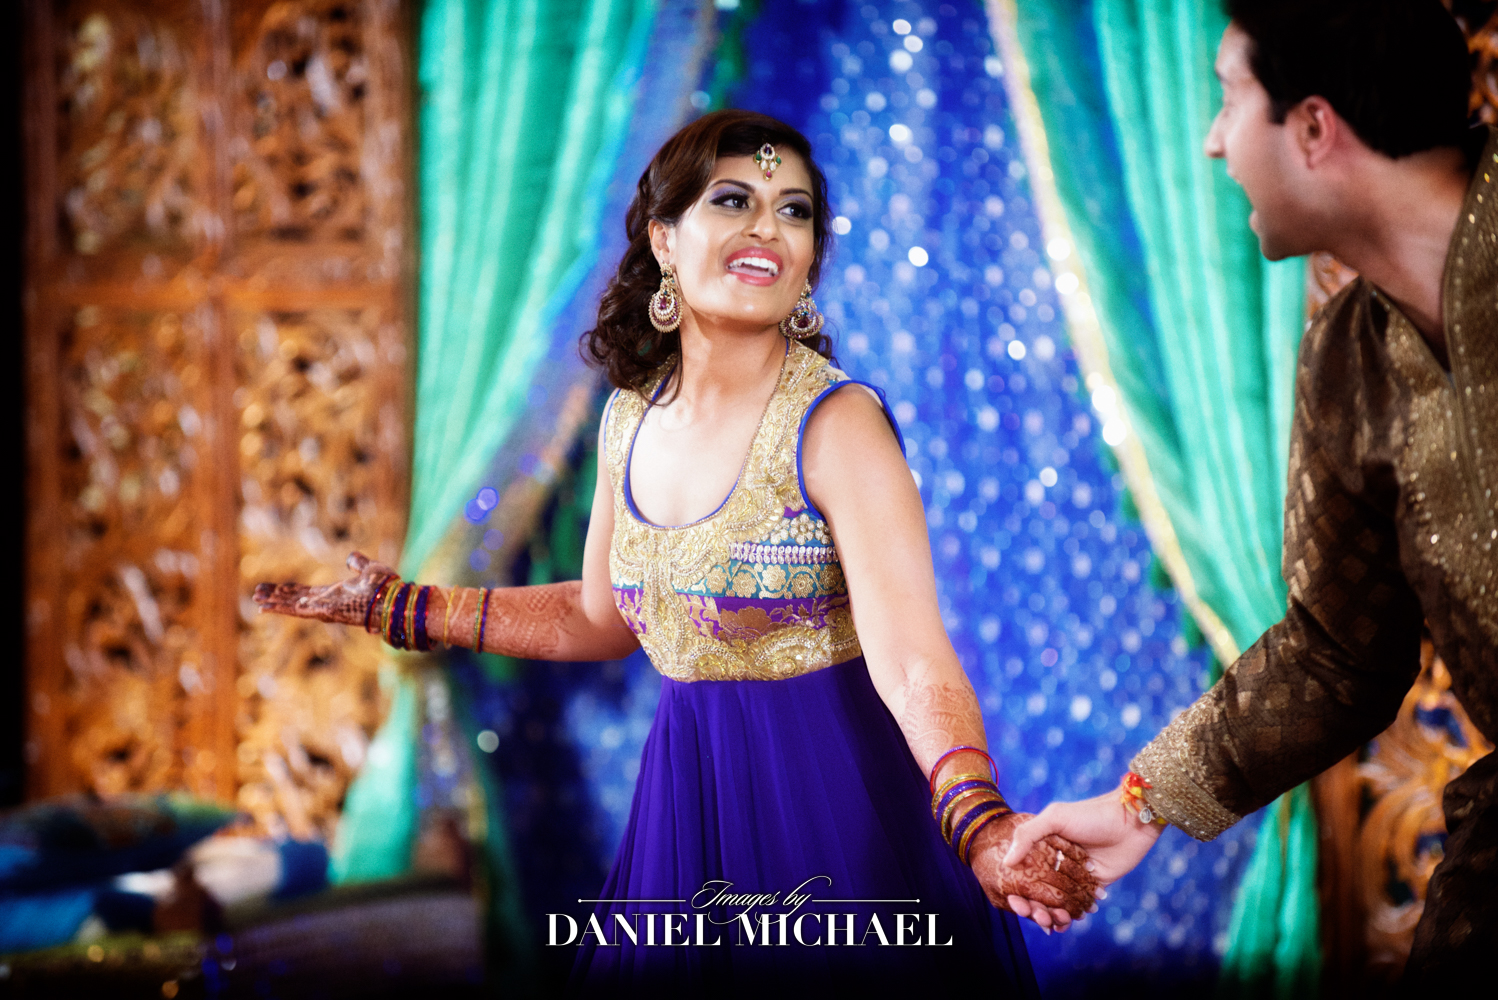 Colorful Sangeet dance celebration in South Asian culture